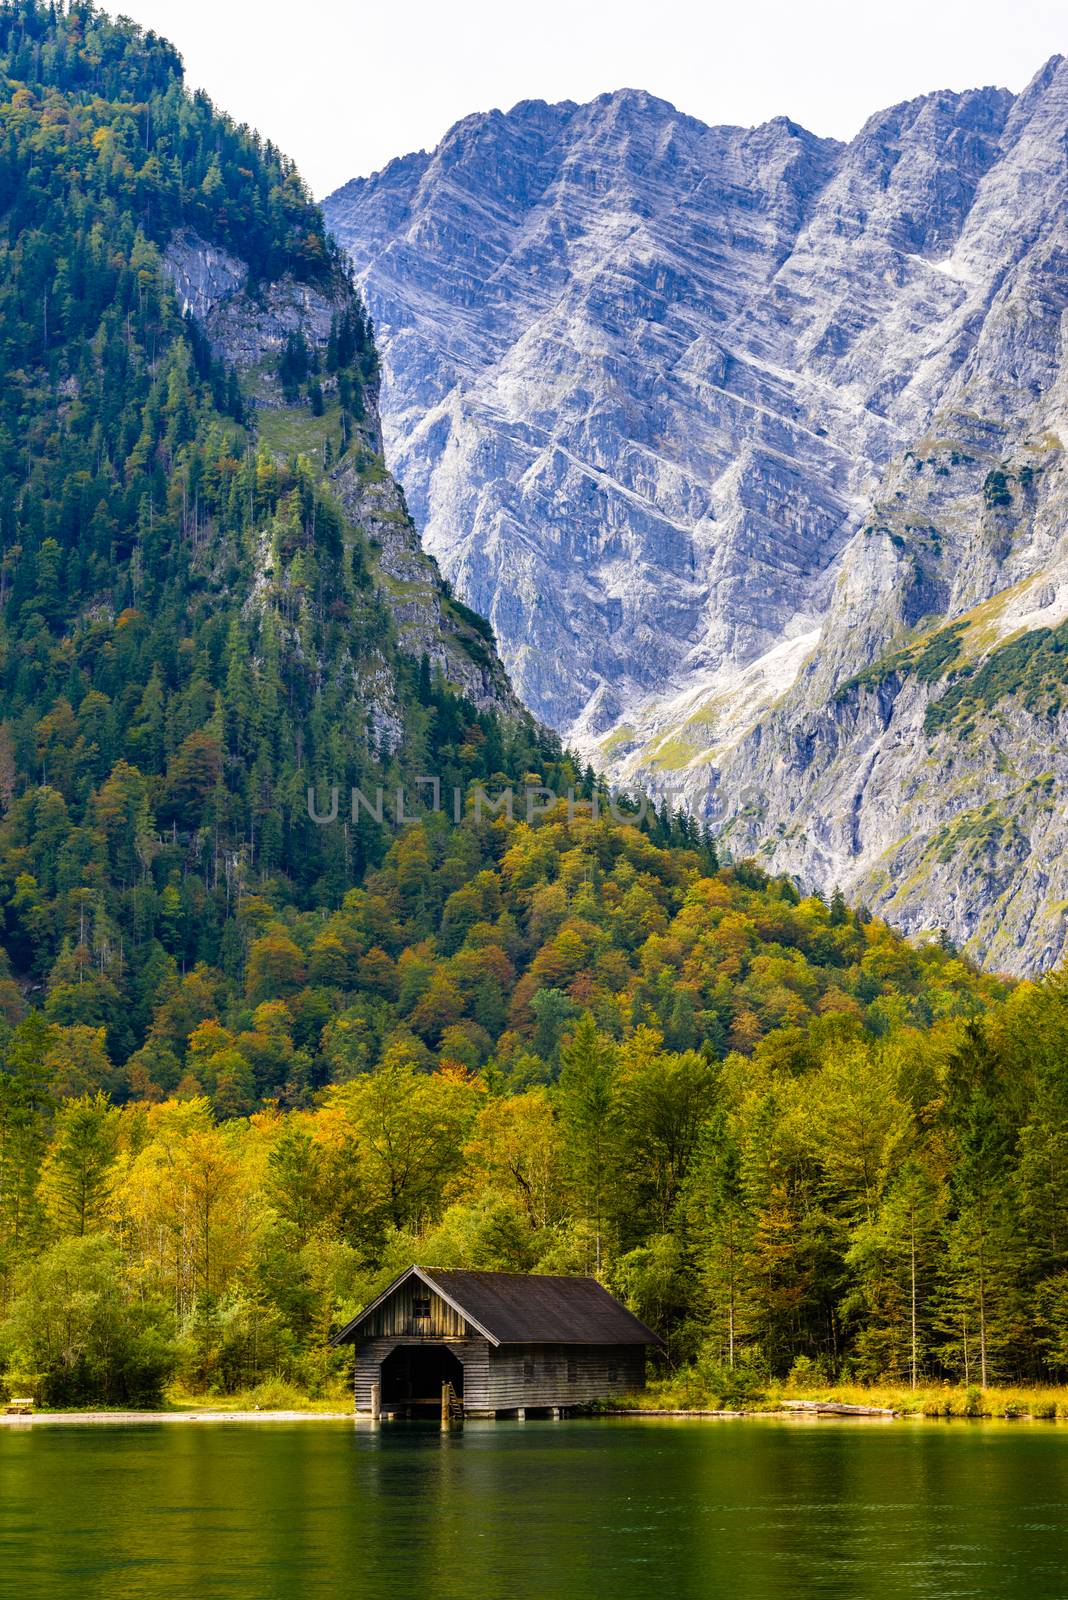 Wooden old fish house on the lake Koenigssee in Konigsee, Berchtesgaden National Park, Bavaria, Germany.